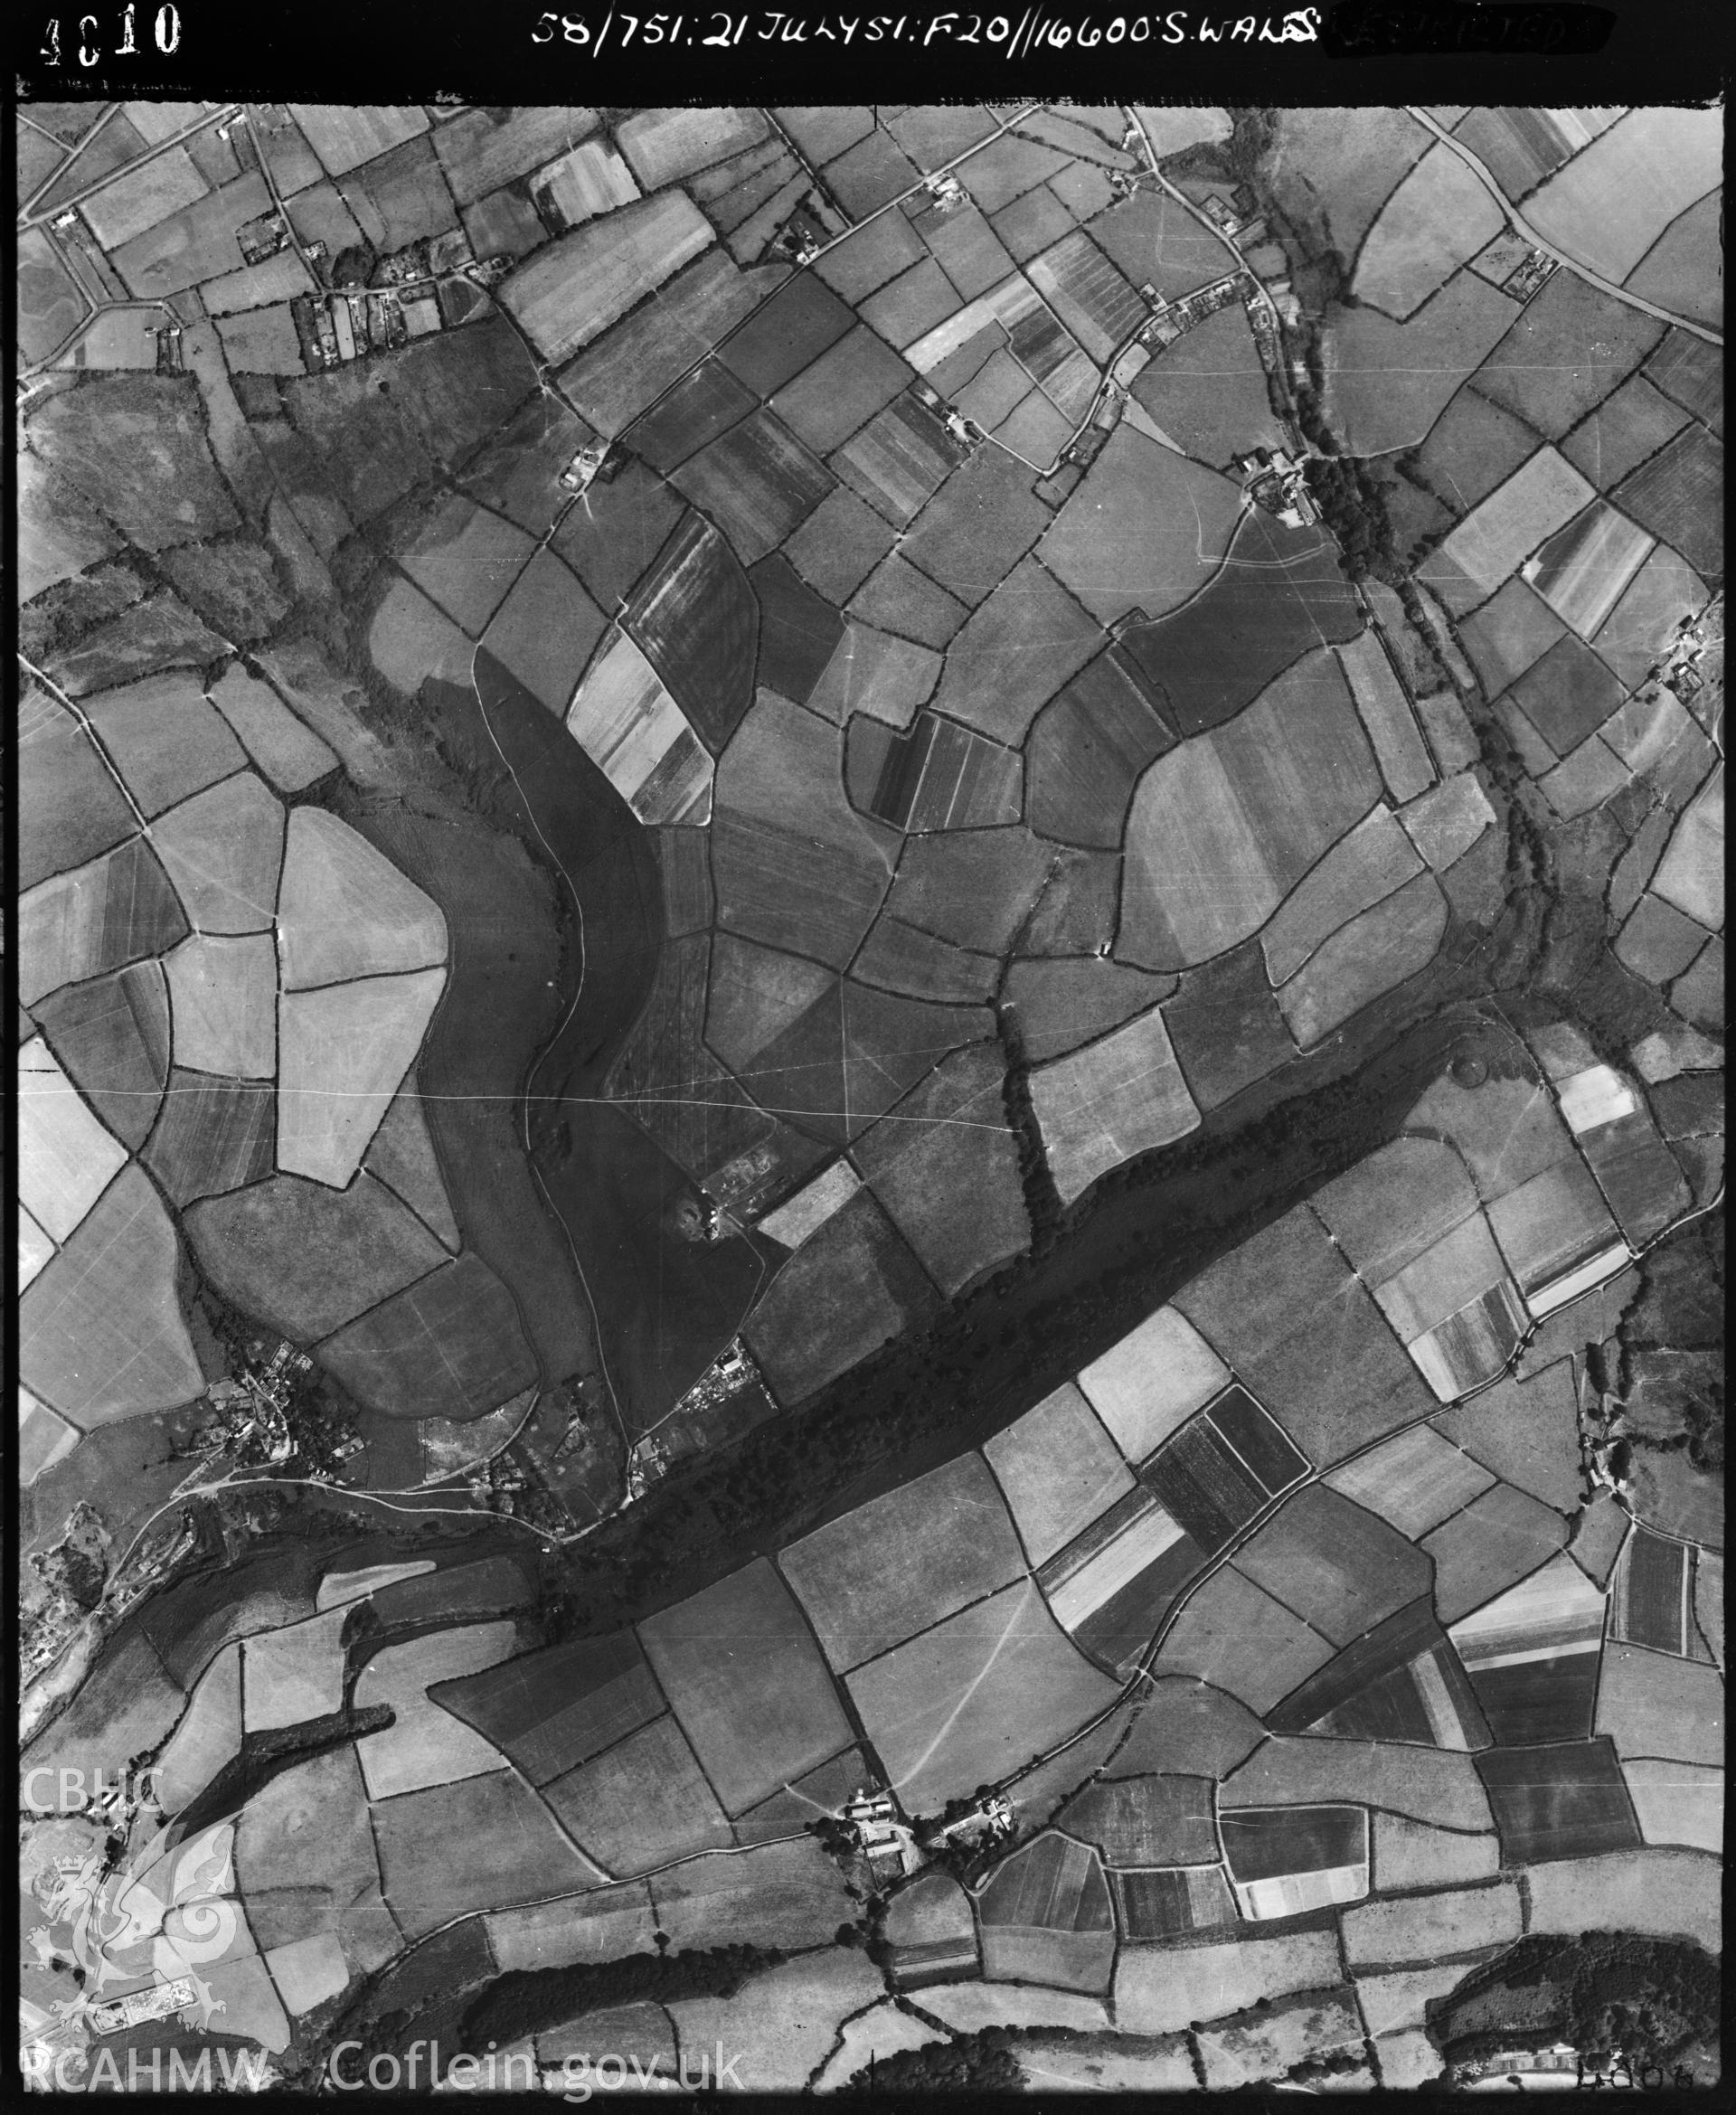 Black and white vertical aerial photograph taken by the RAF on 21/07/1951 at a scale of 1:10000. The photograph includes part of Cwm Capel area at Burry Port in Carmarthenshire.